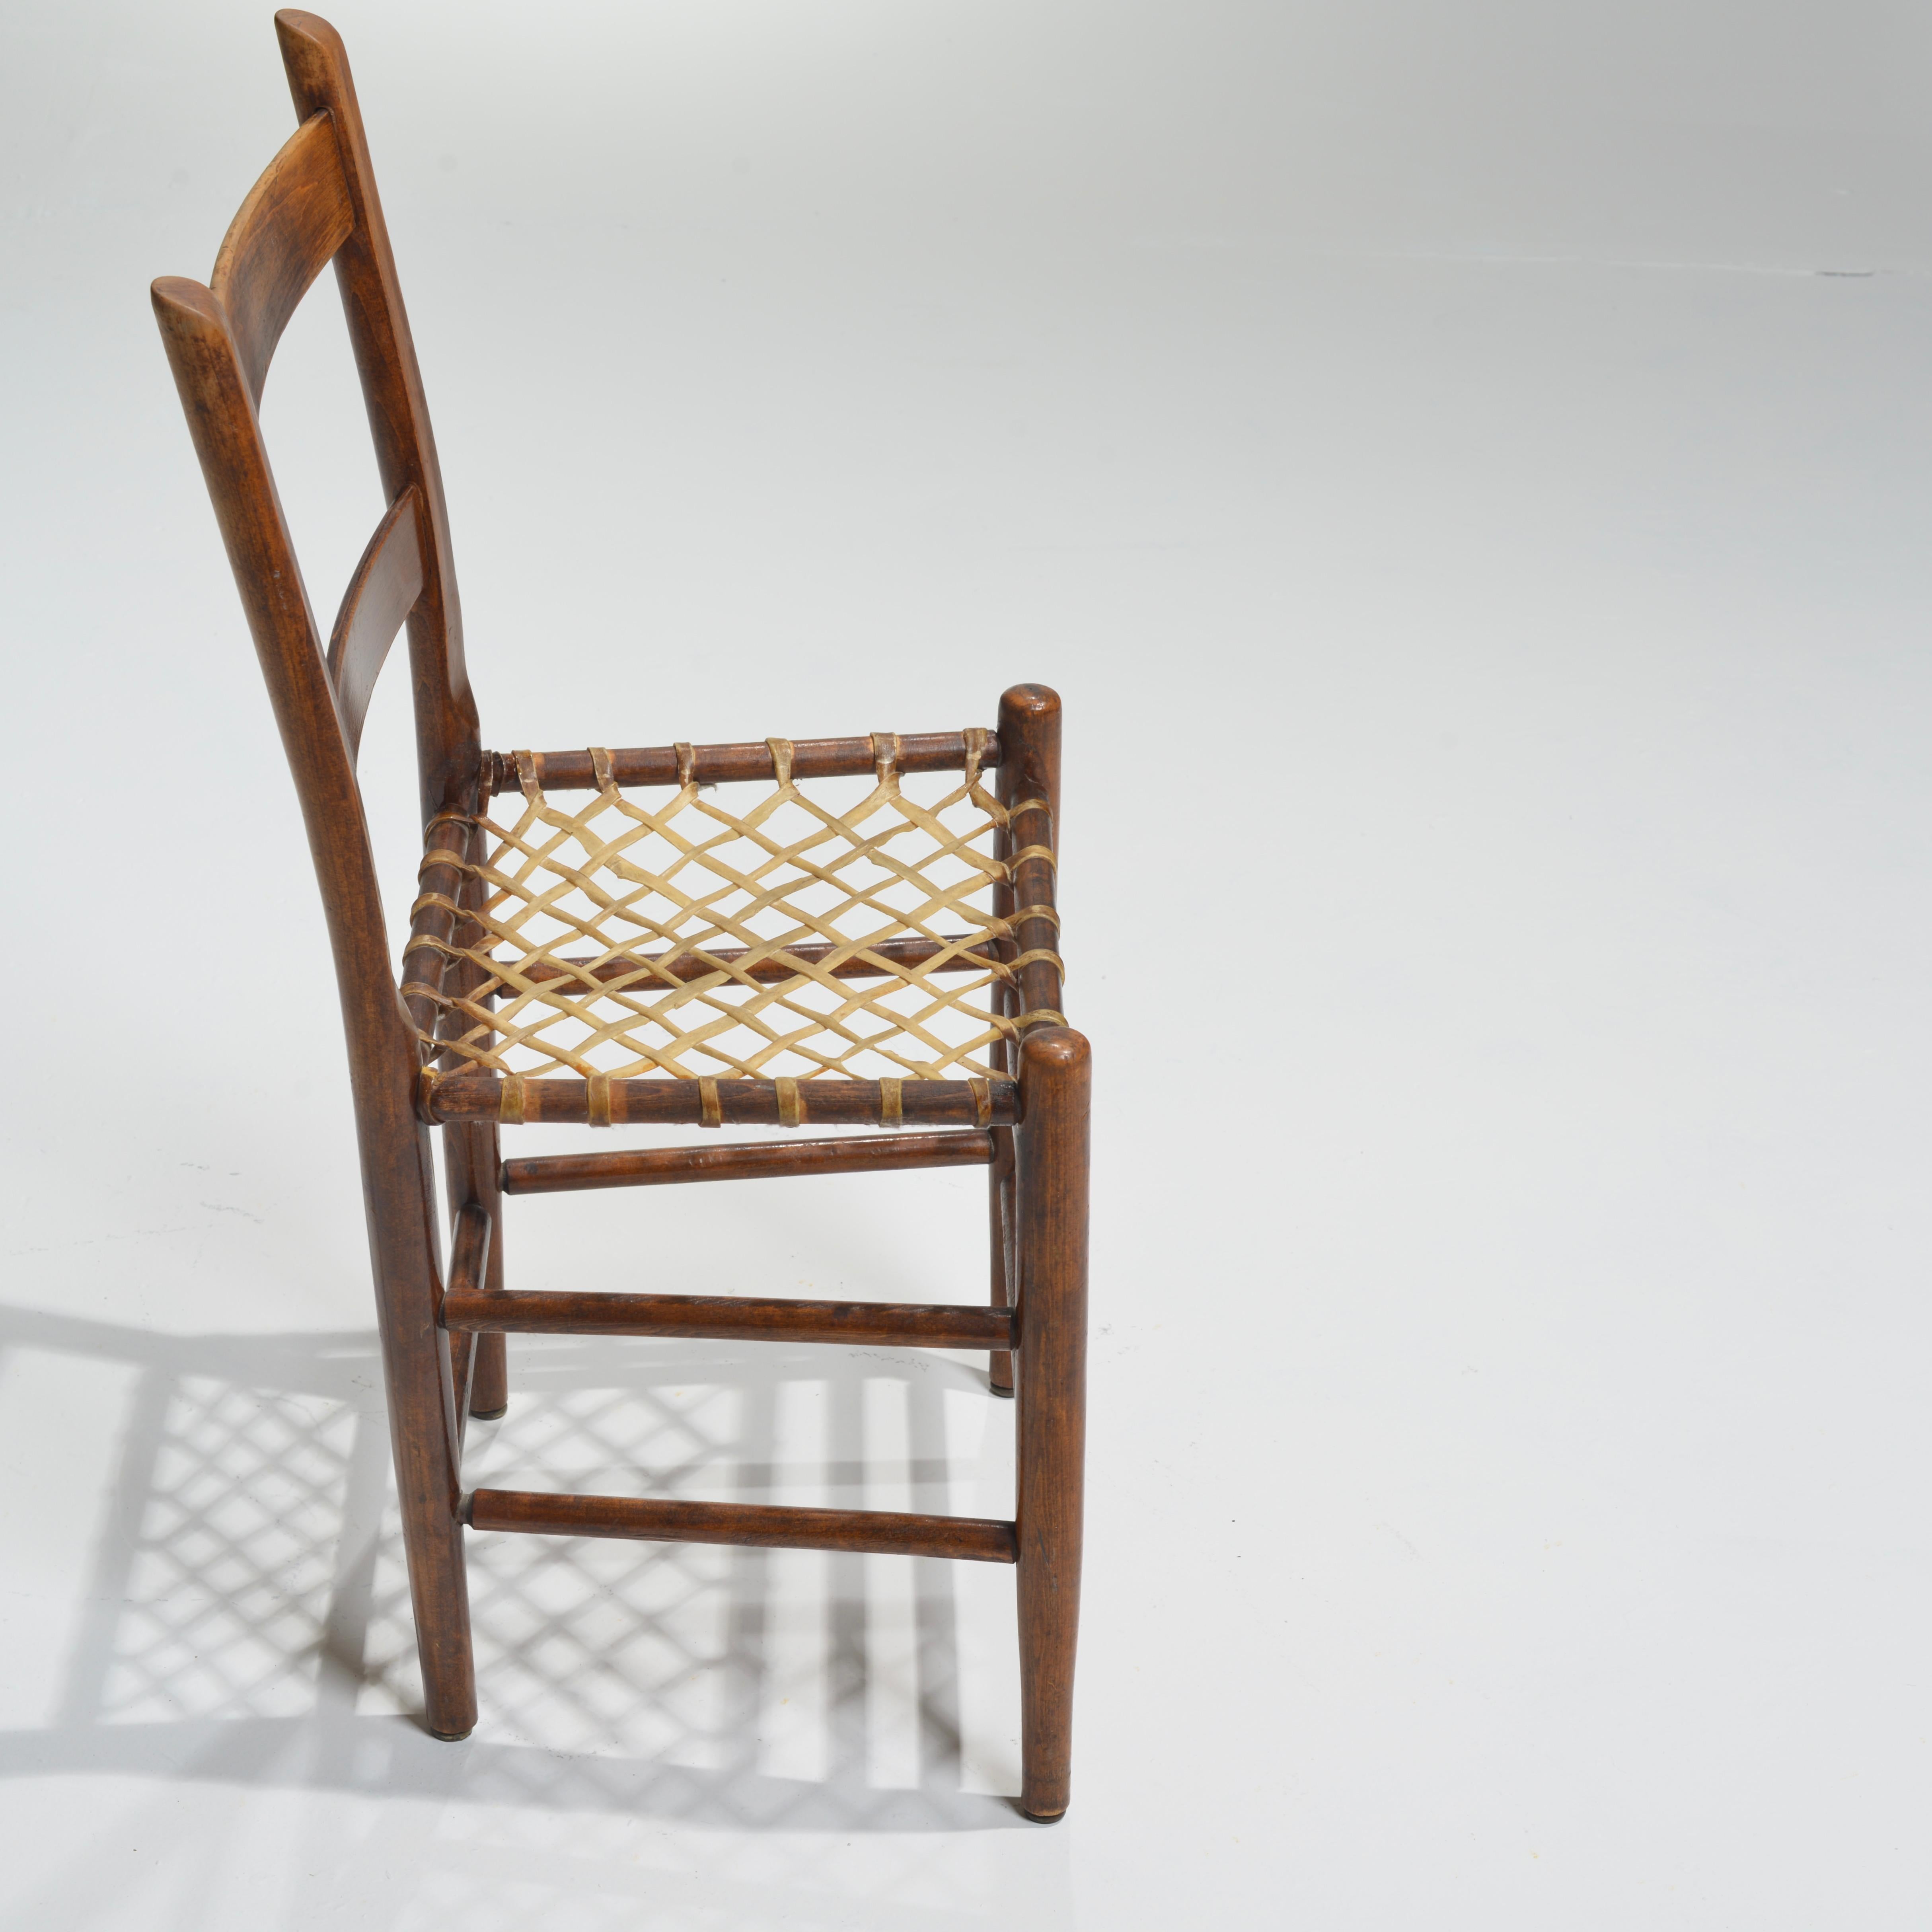 19th Century Rawhide Primitive Chairs, c. 1850 For Sale 6